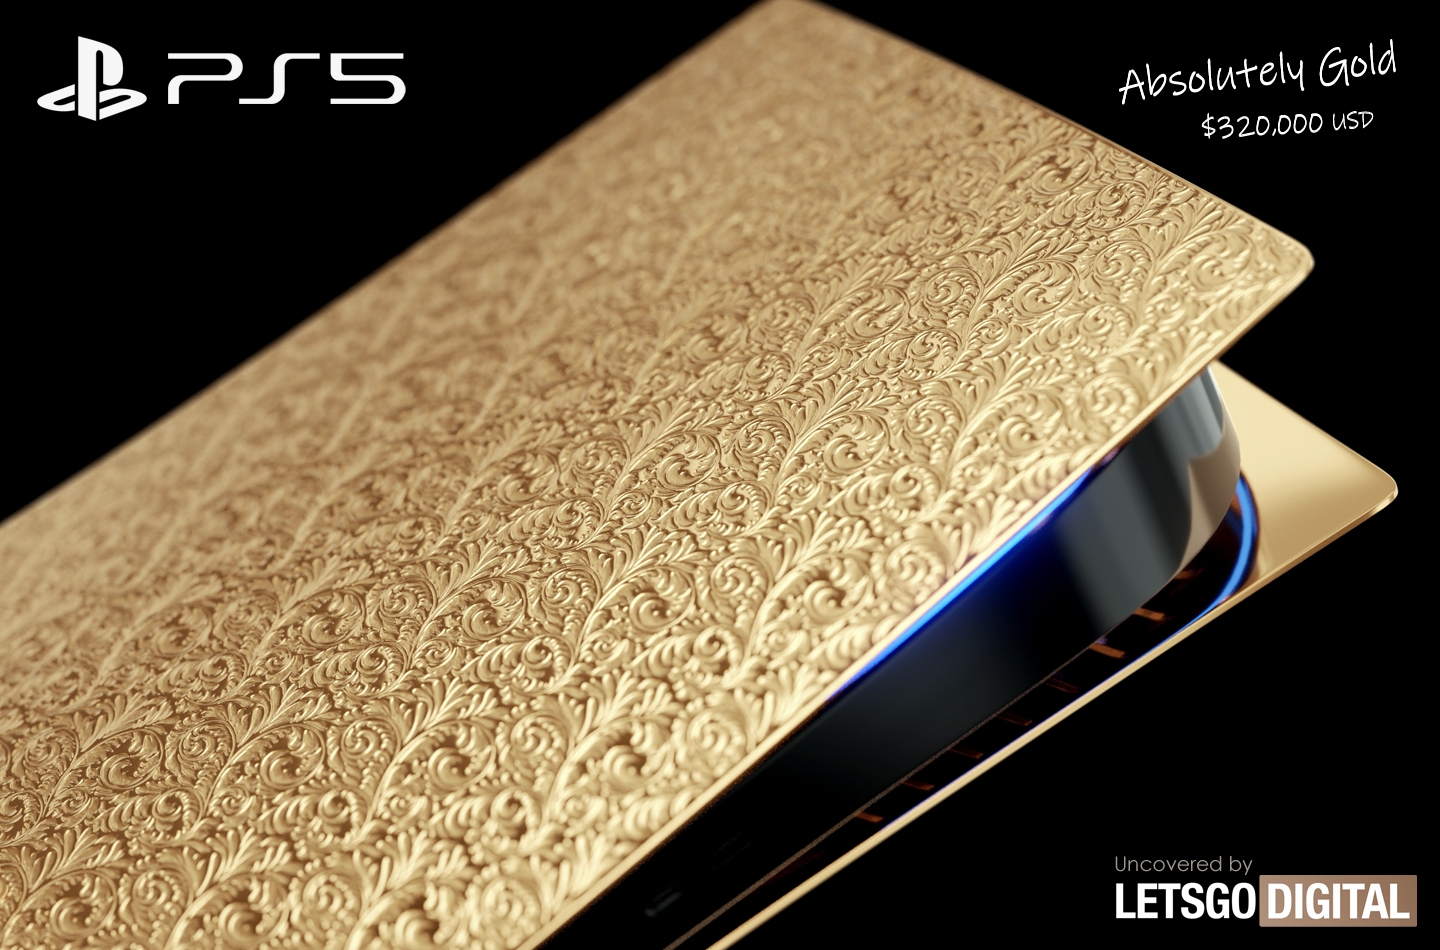 A PlayStation 5 made of 24K gold has been announced, and it'll be